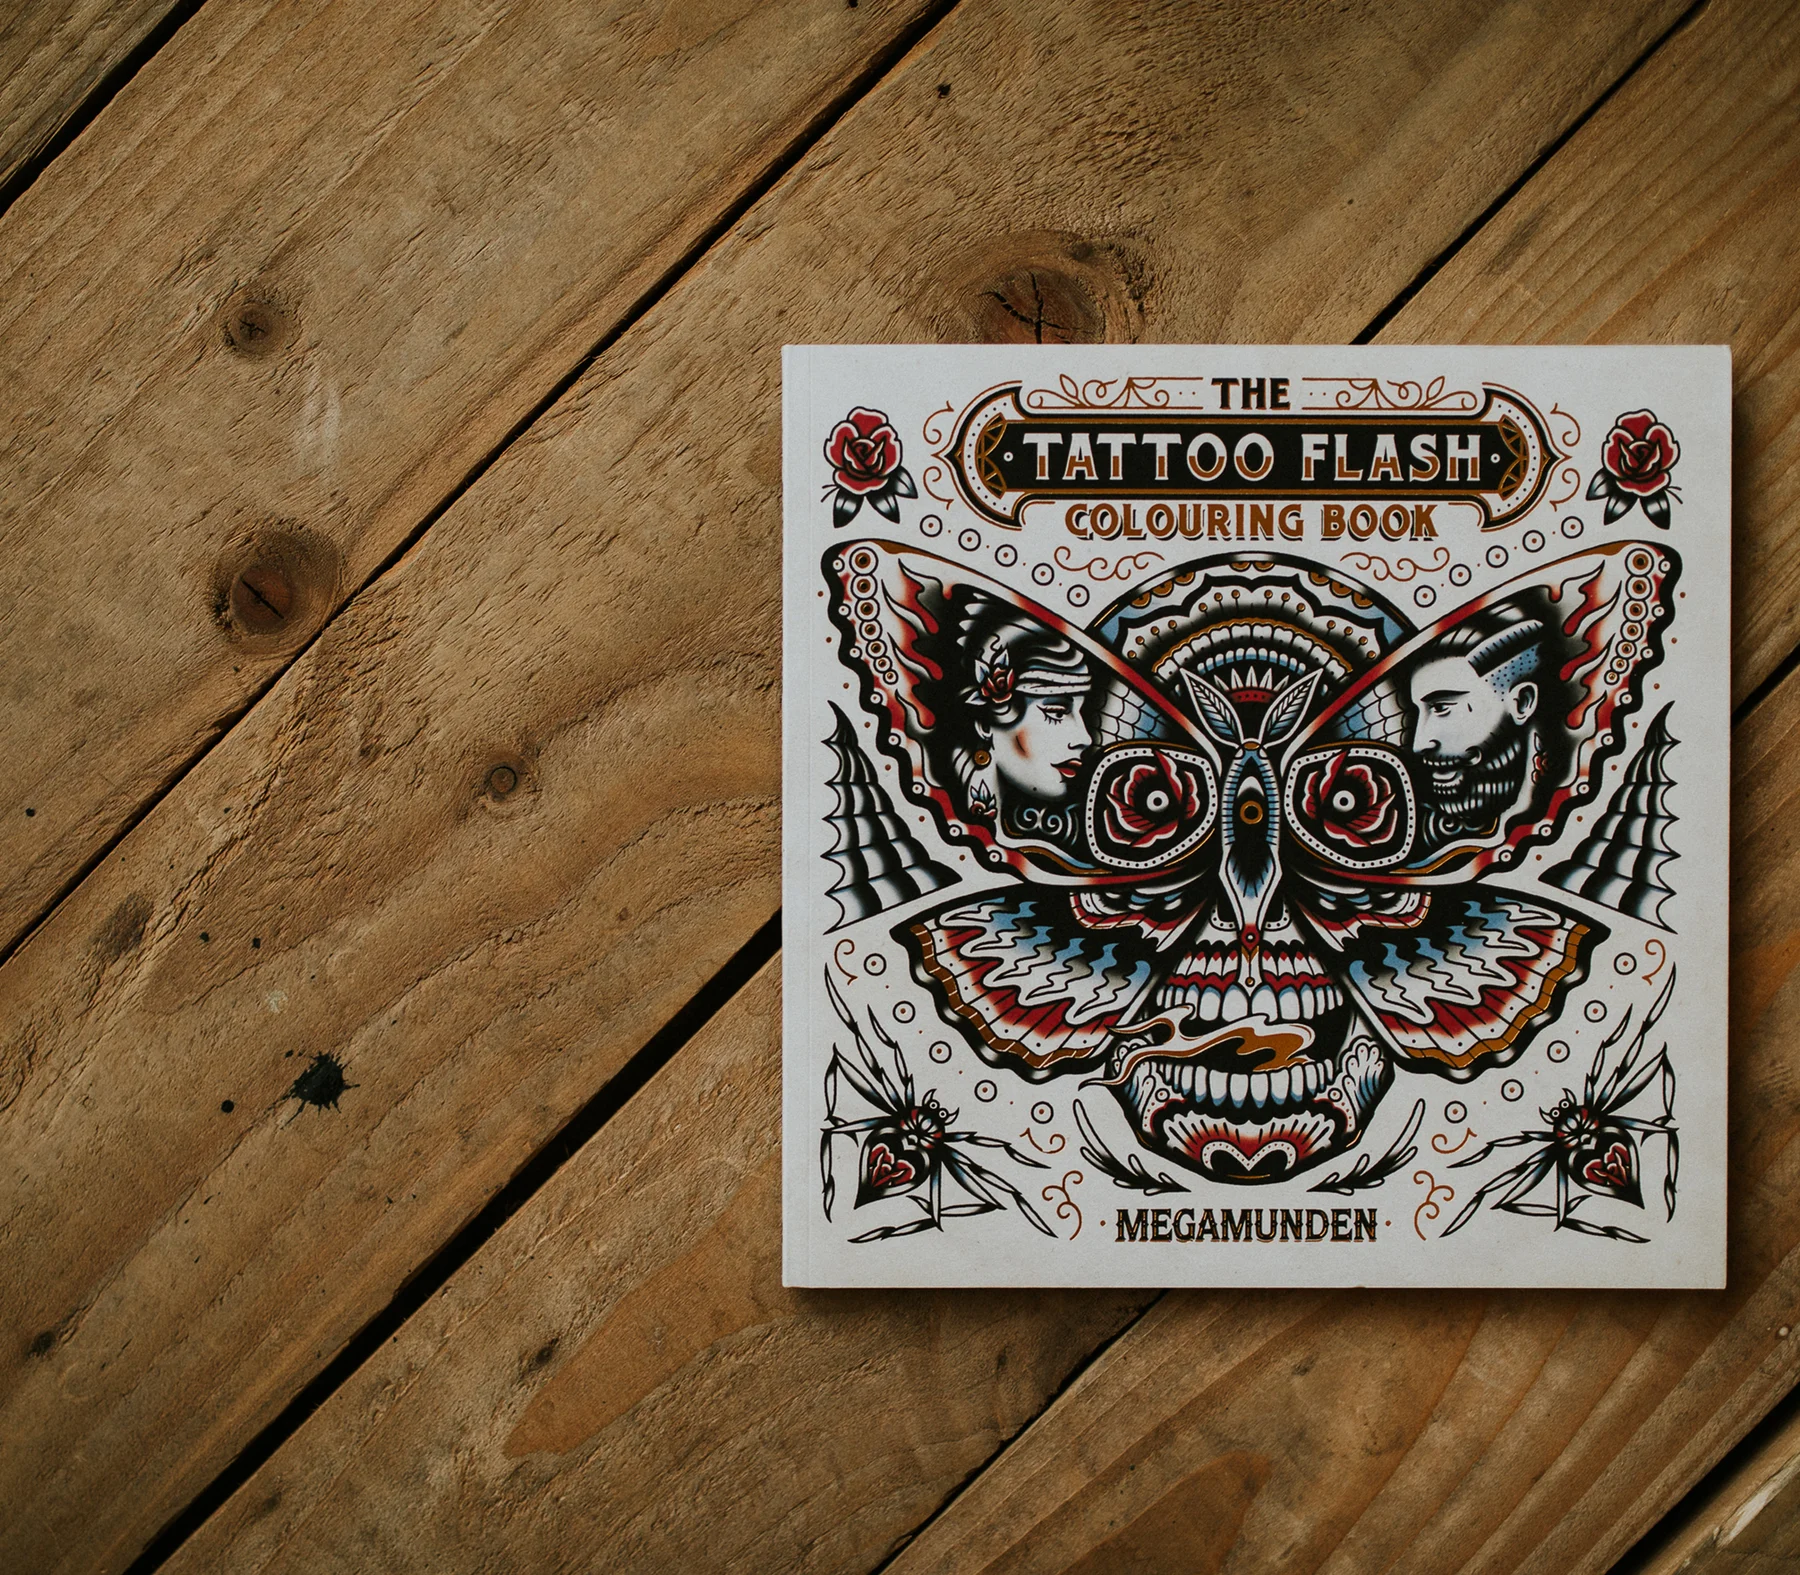 The Tattoo Flash Colouring Book by MEGAMUNDEN